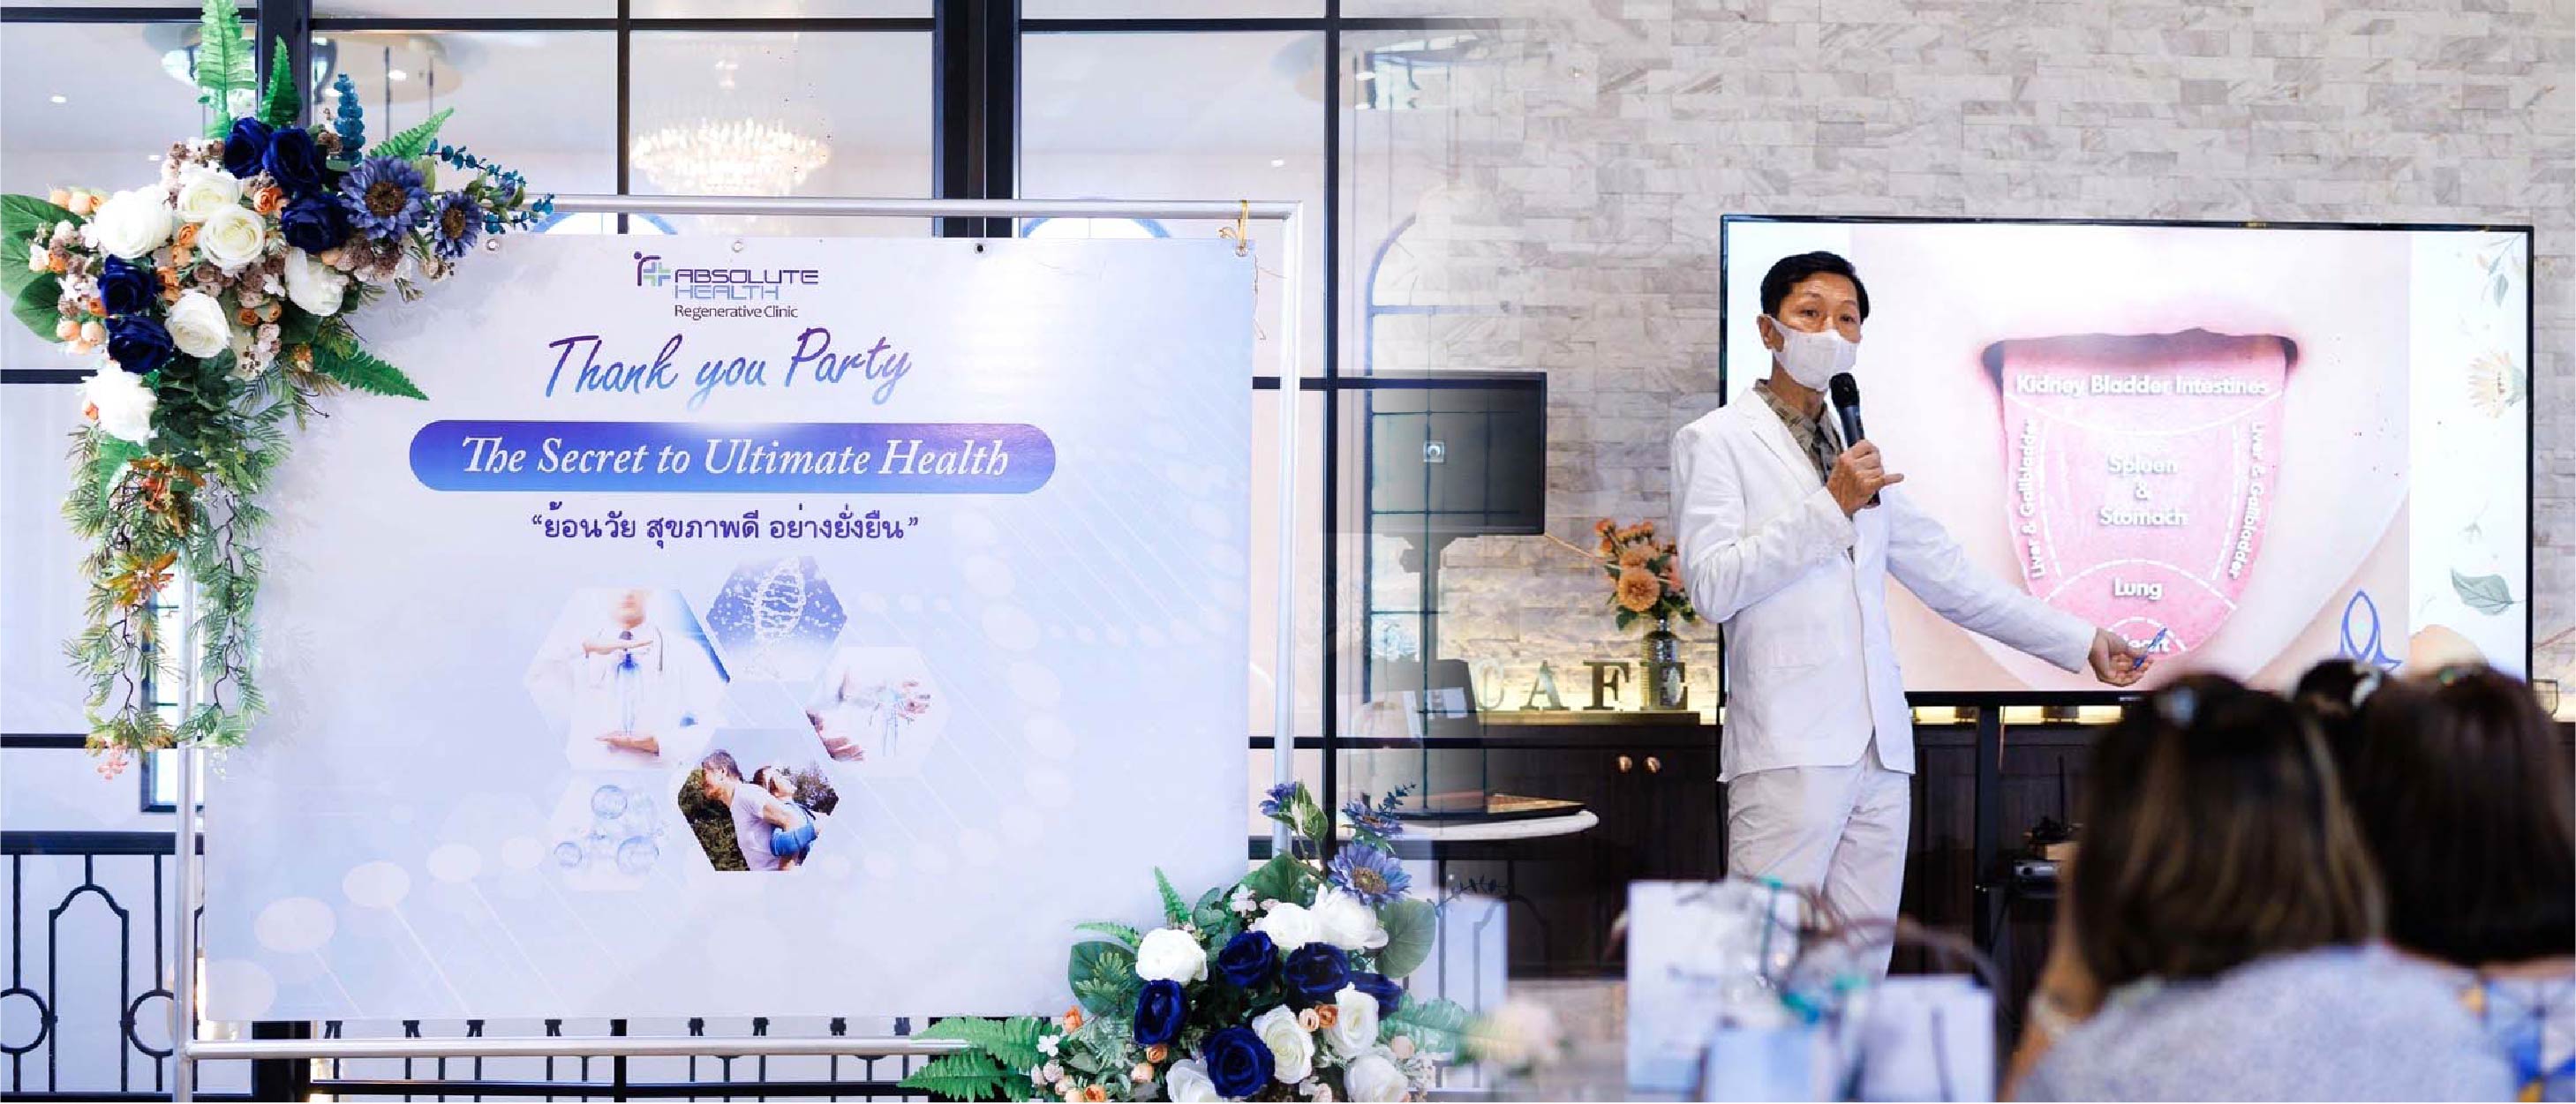 Absolute Health Integrative Medicine Center Khon Kaen takes great delight in extending our heartfelt appreciation to our valued clients and friends.